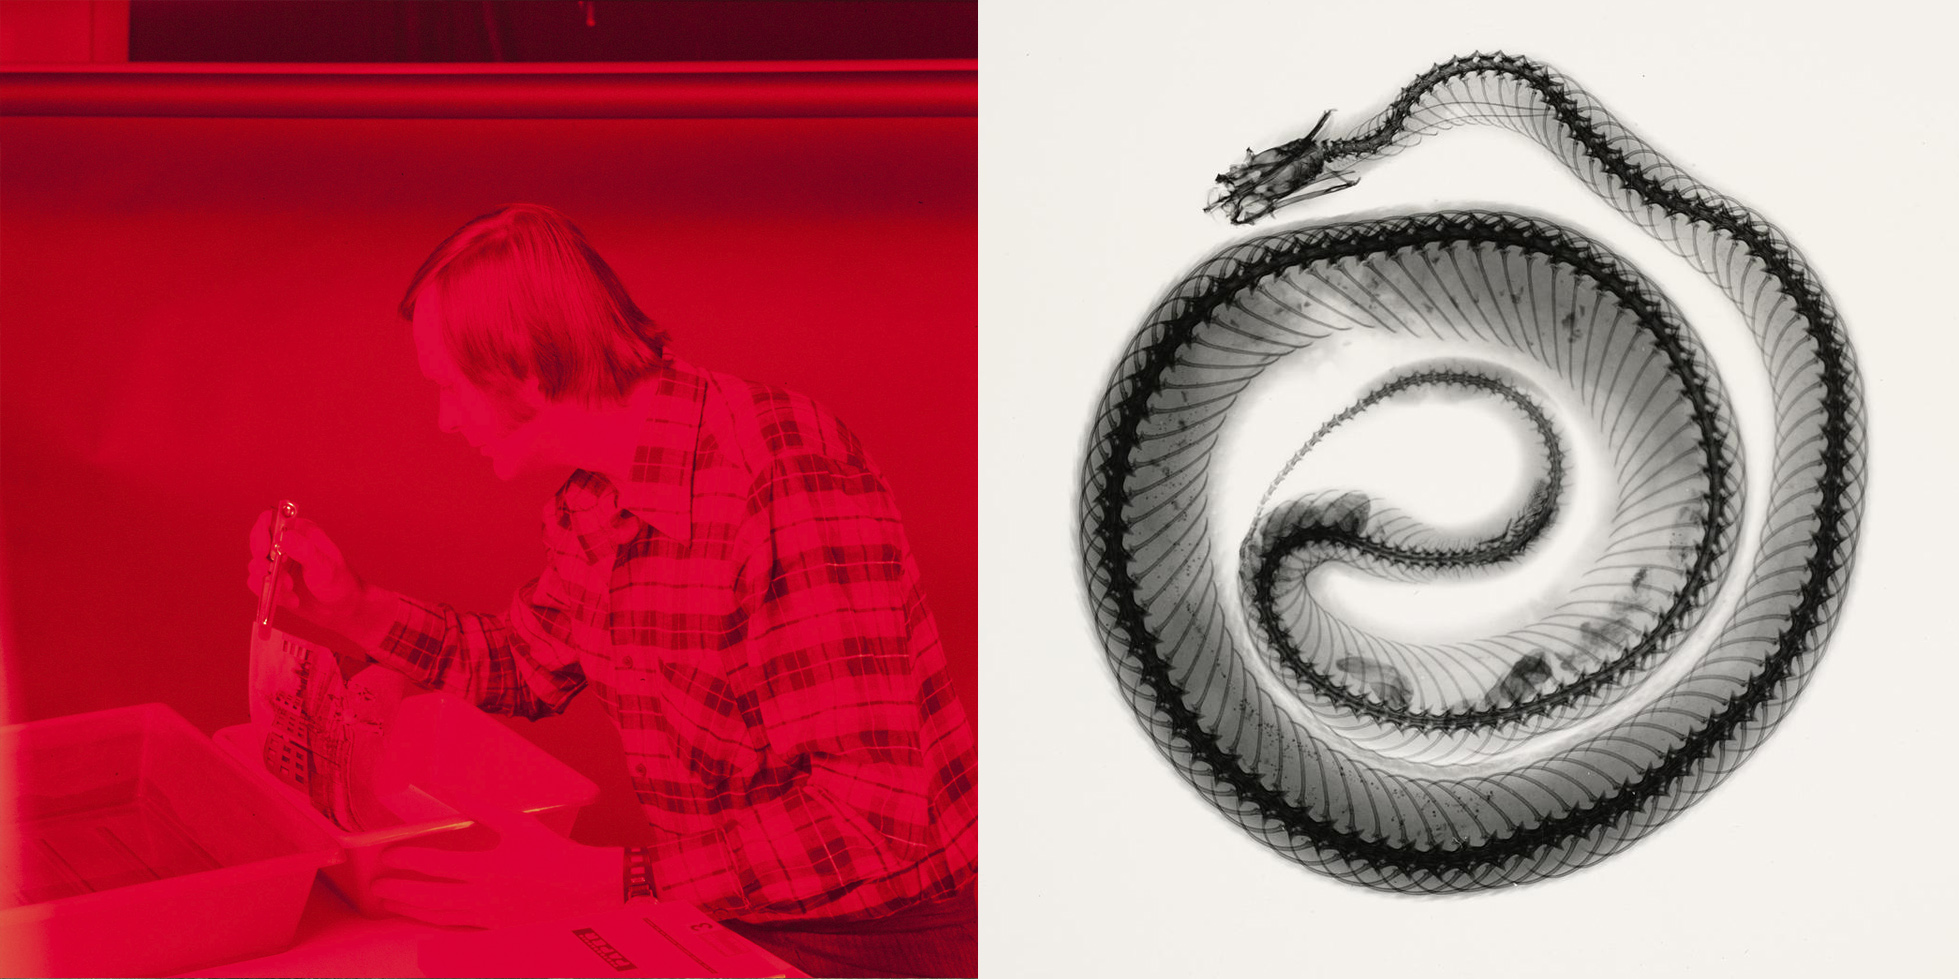 Two images: a man working in the darkroom and a x-ray image of a snake.